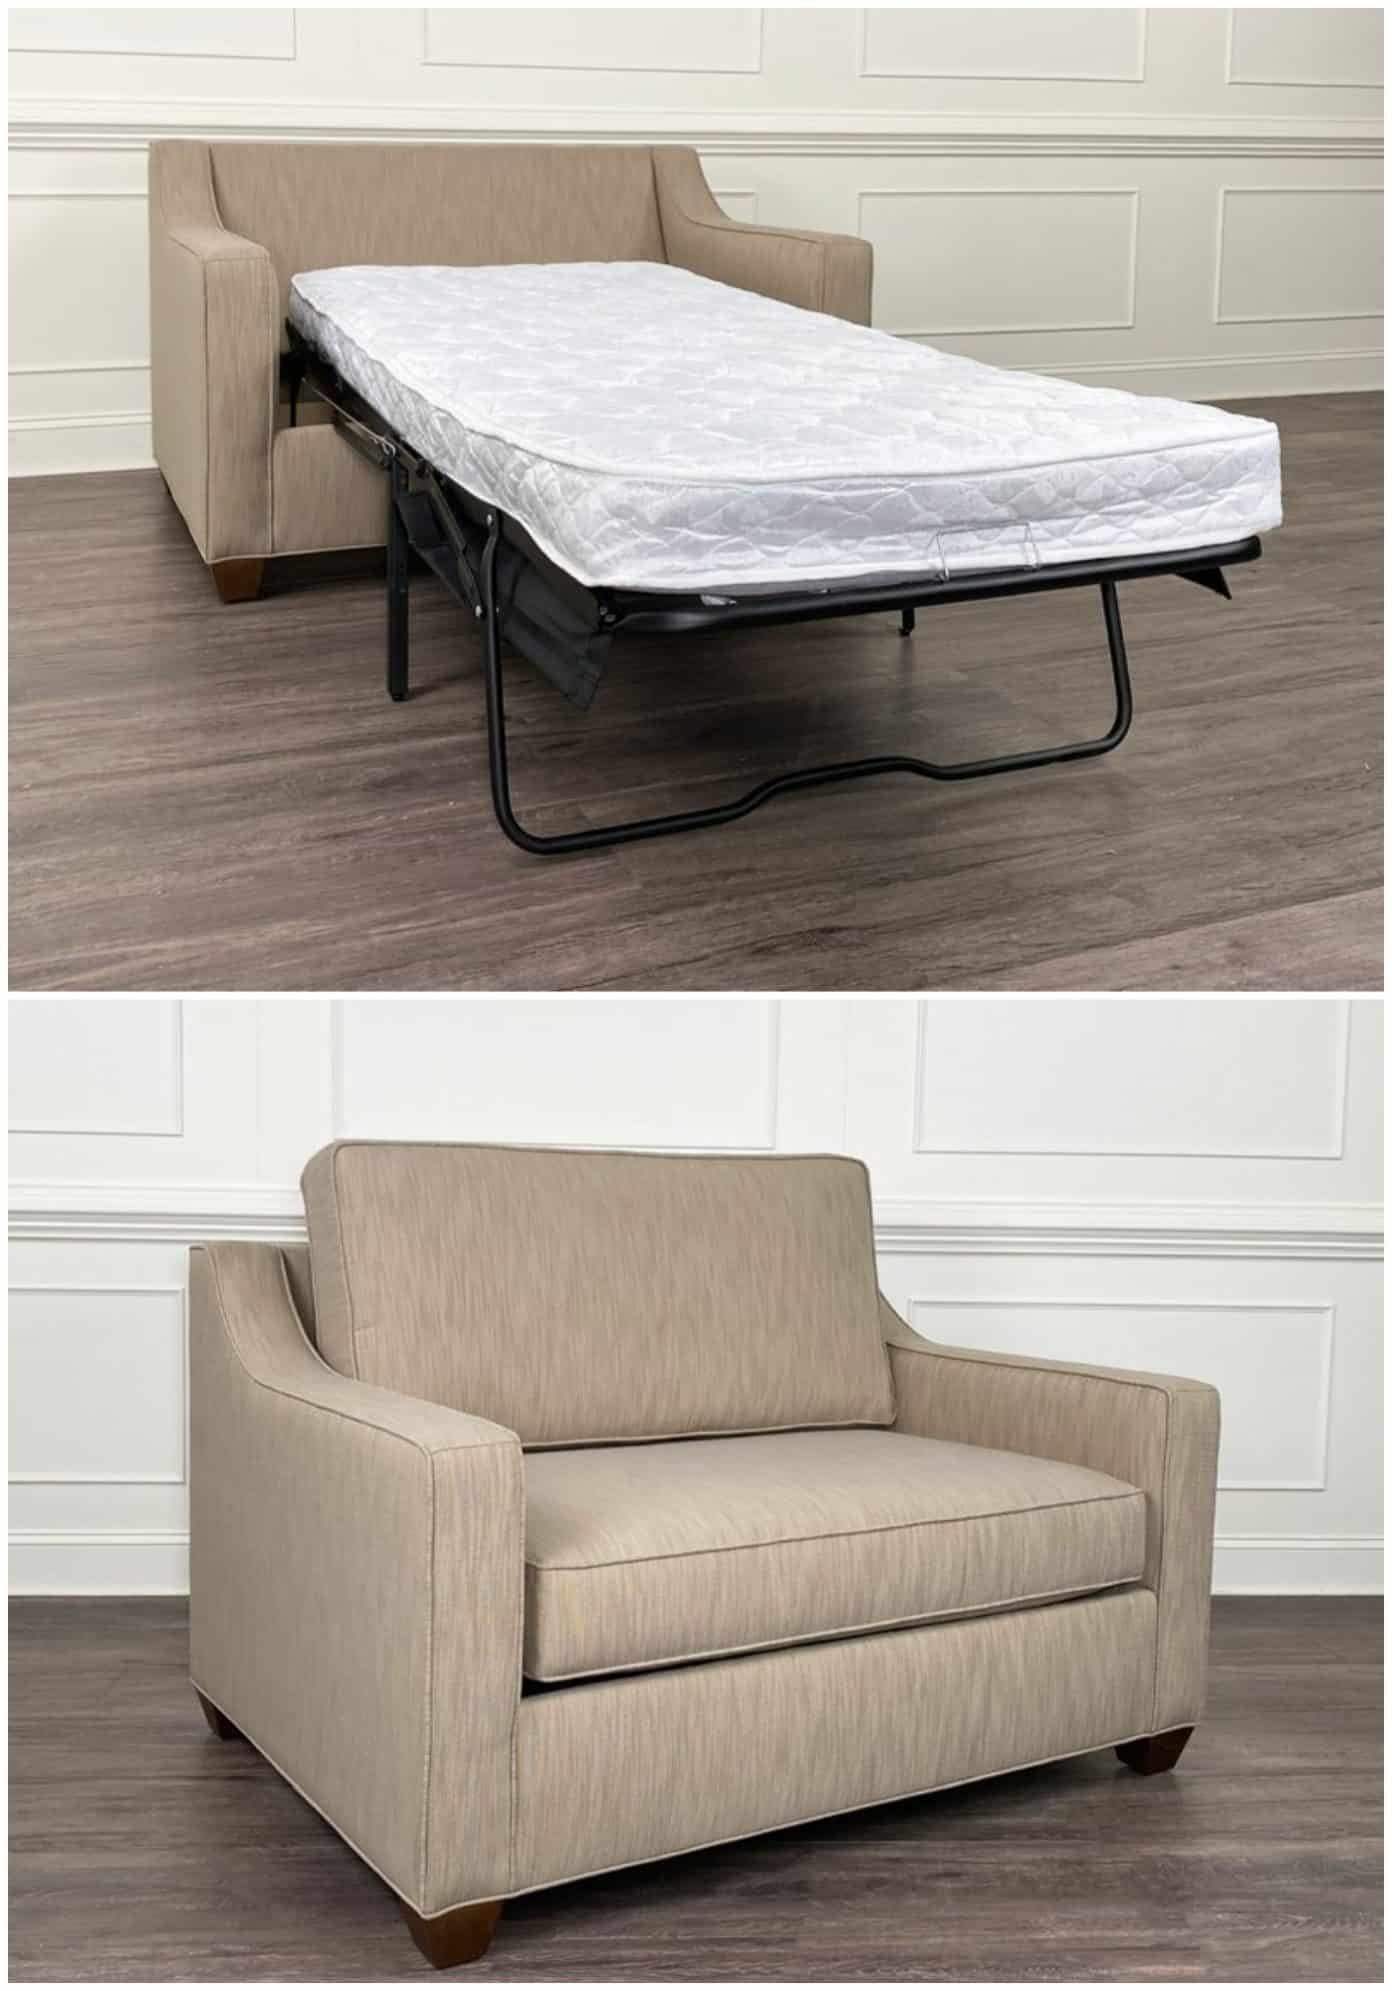 12 Convertible Chair Beds That Go From Seating To Sleeping In Seconds In Convertible Light Gray Chair Beds (View 11 of 20)